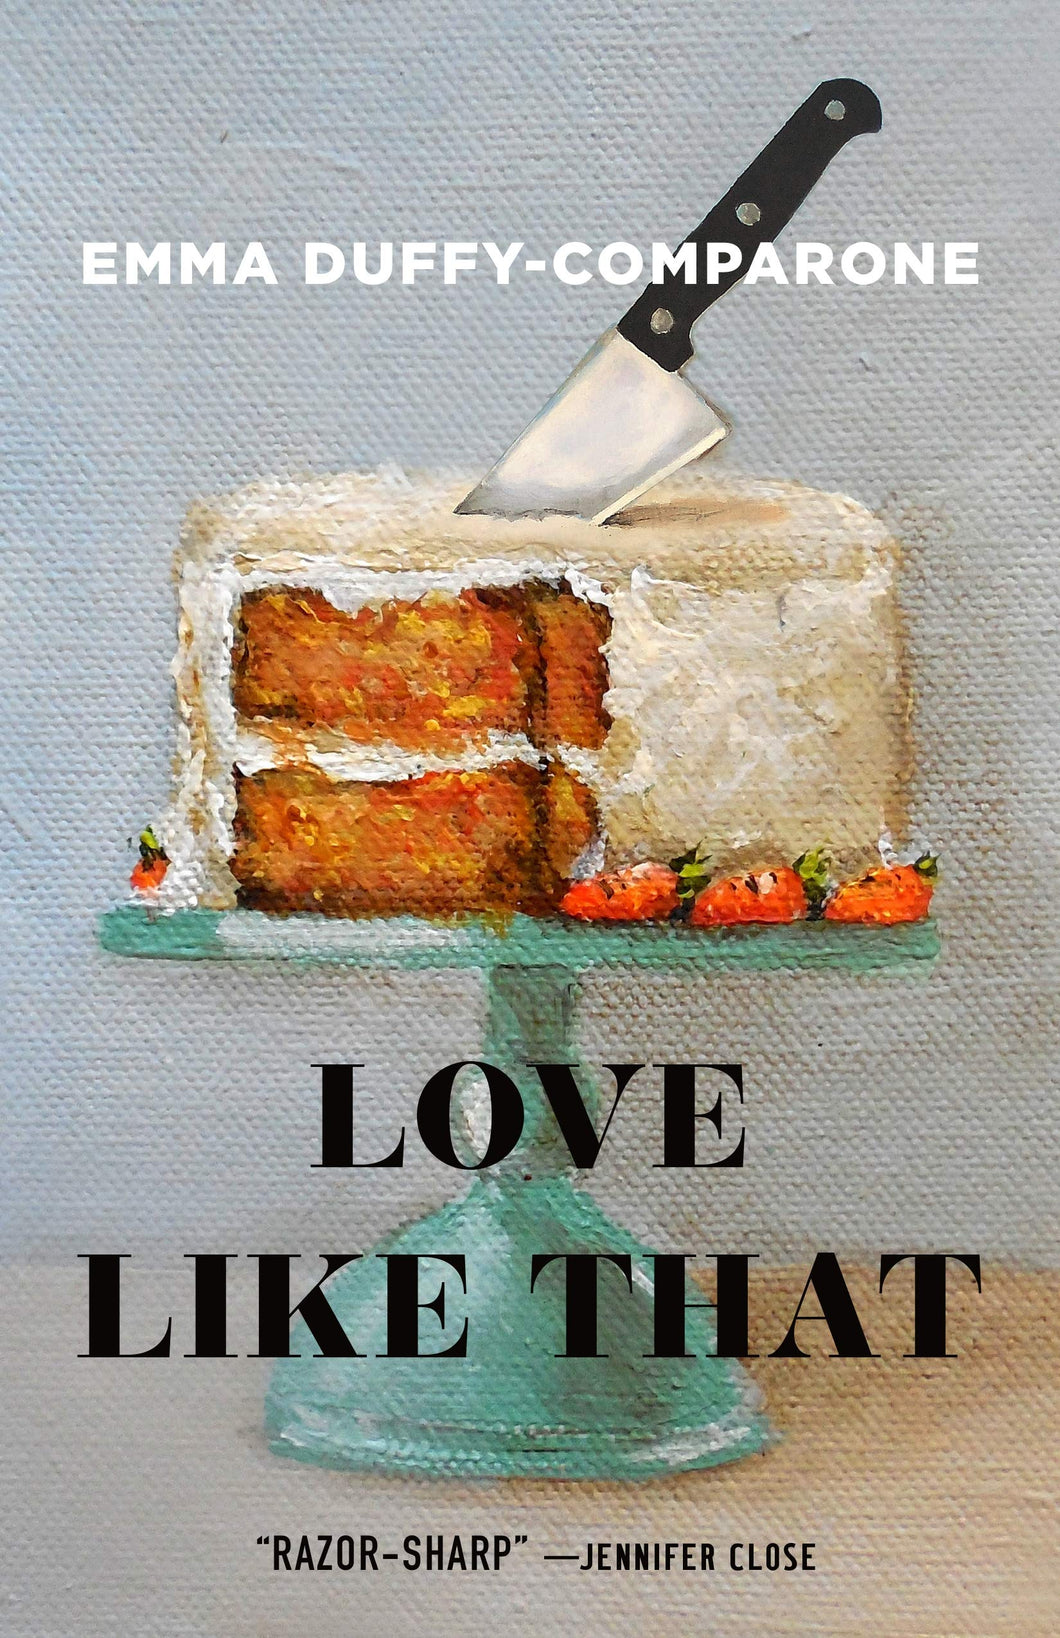 Love Like That by Emma Duffy-Comparone / Hardcover or Paperback - NEW BOOK OR BOOK BOX